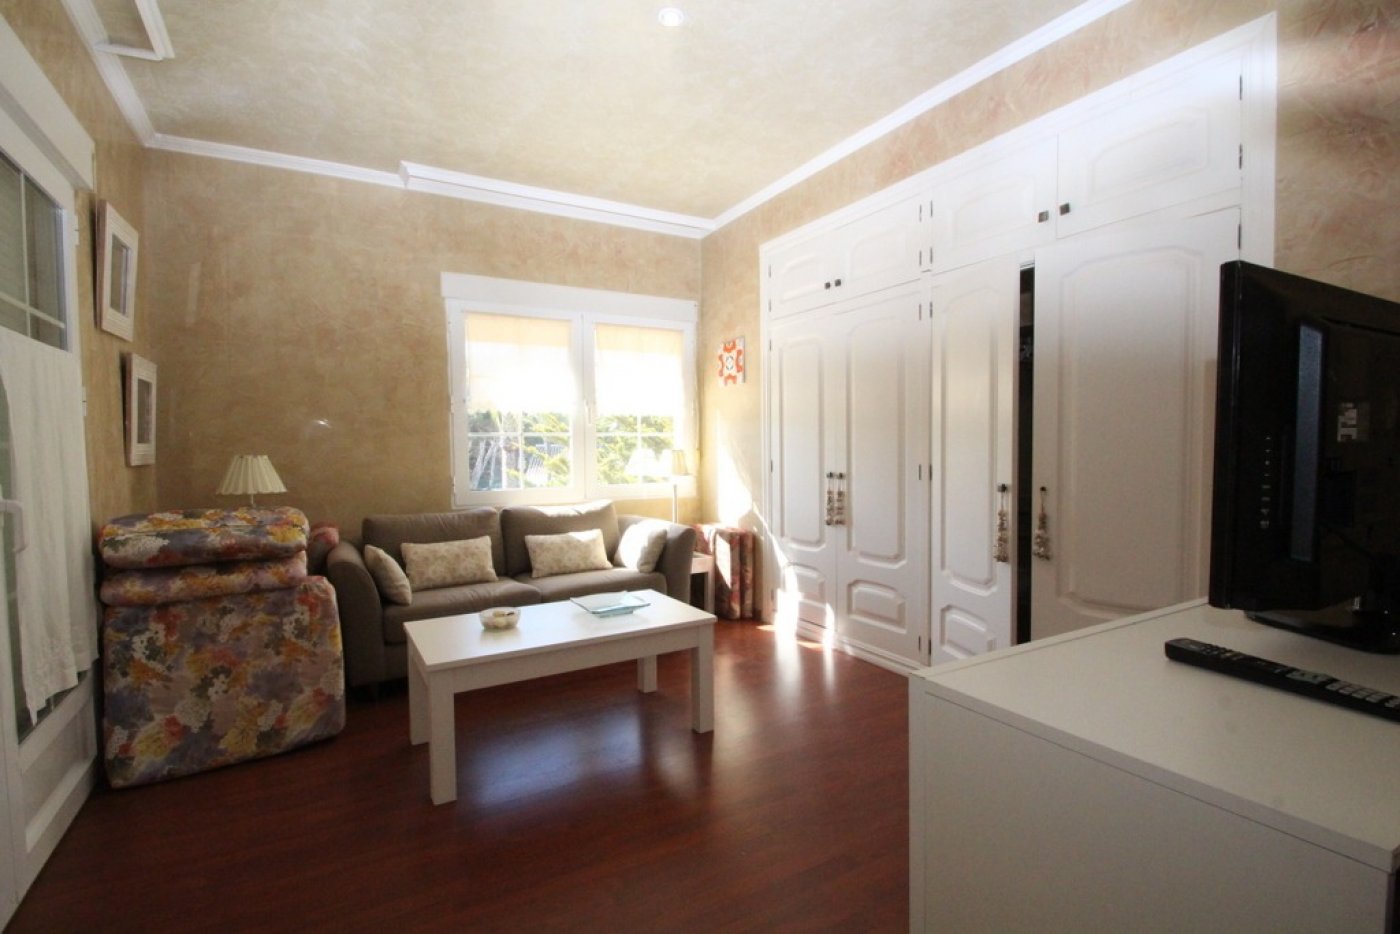 DETACHED LUXURY VILLA 200 METERS FROM THE SEA IN URB. CABO ROIG (ORIHUELA COSTA)